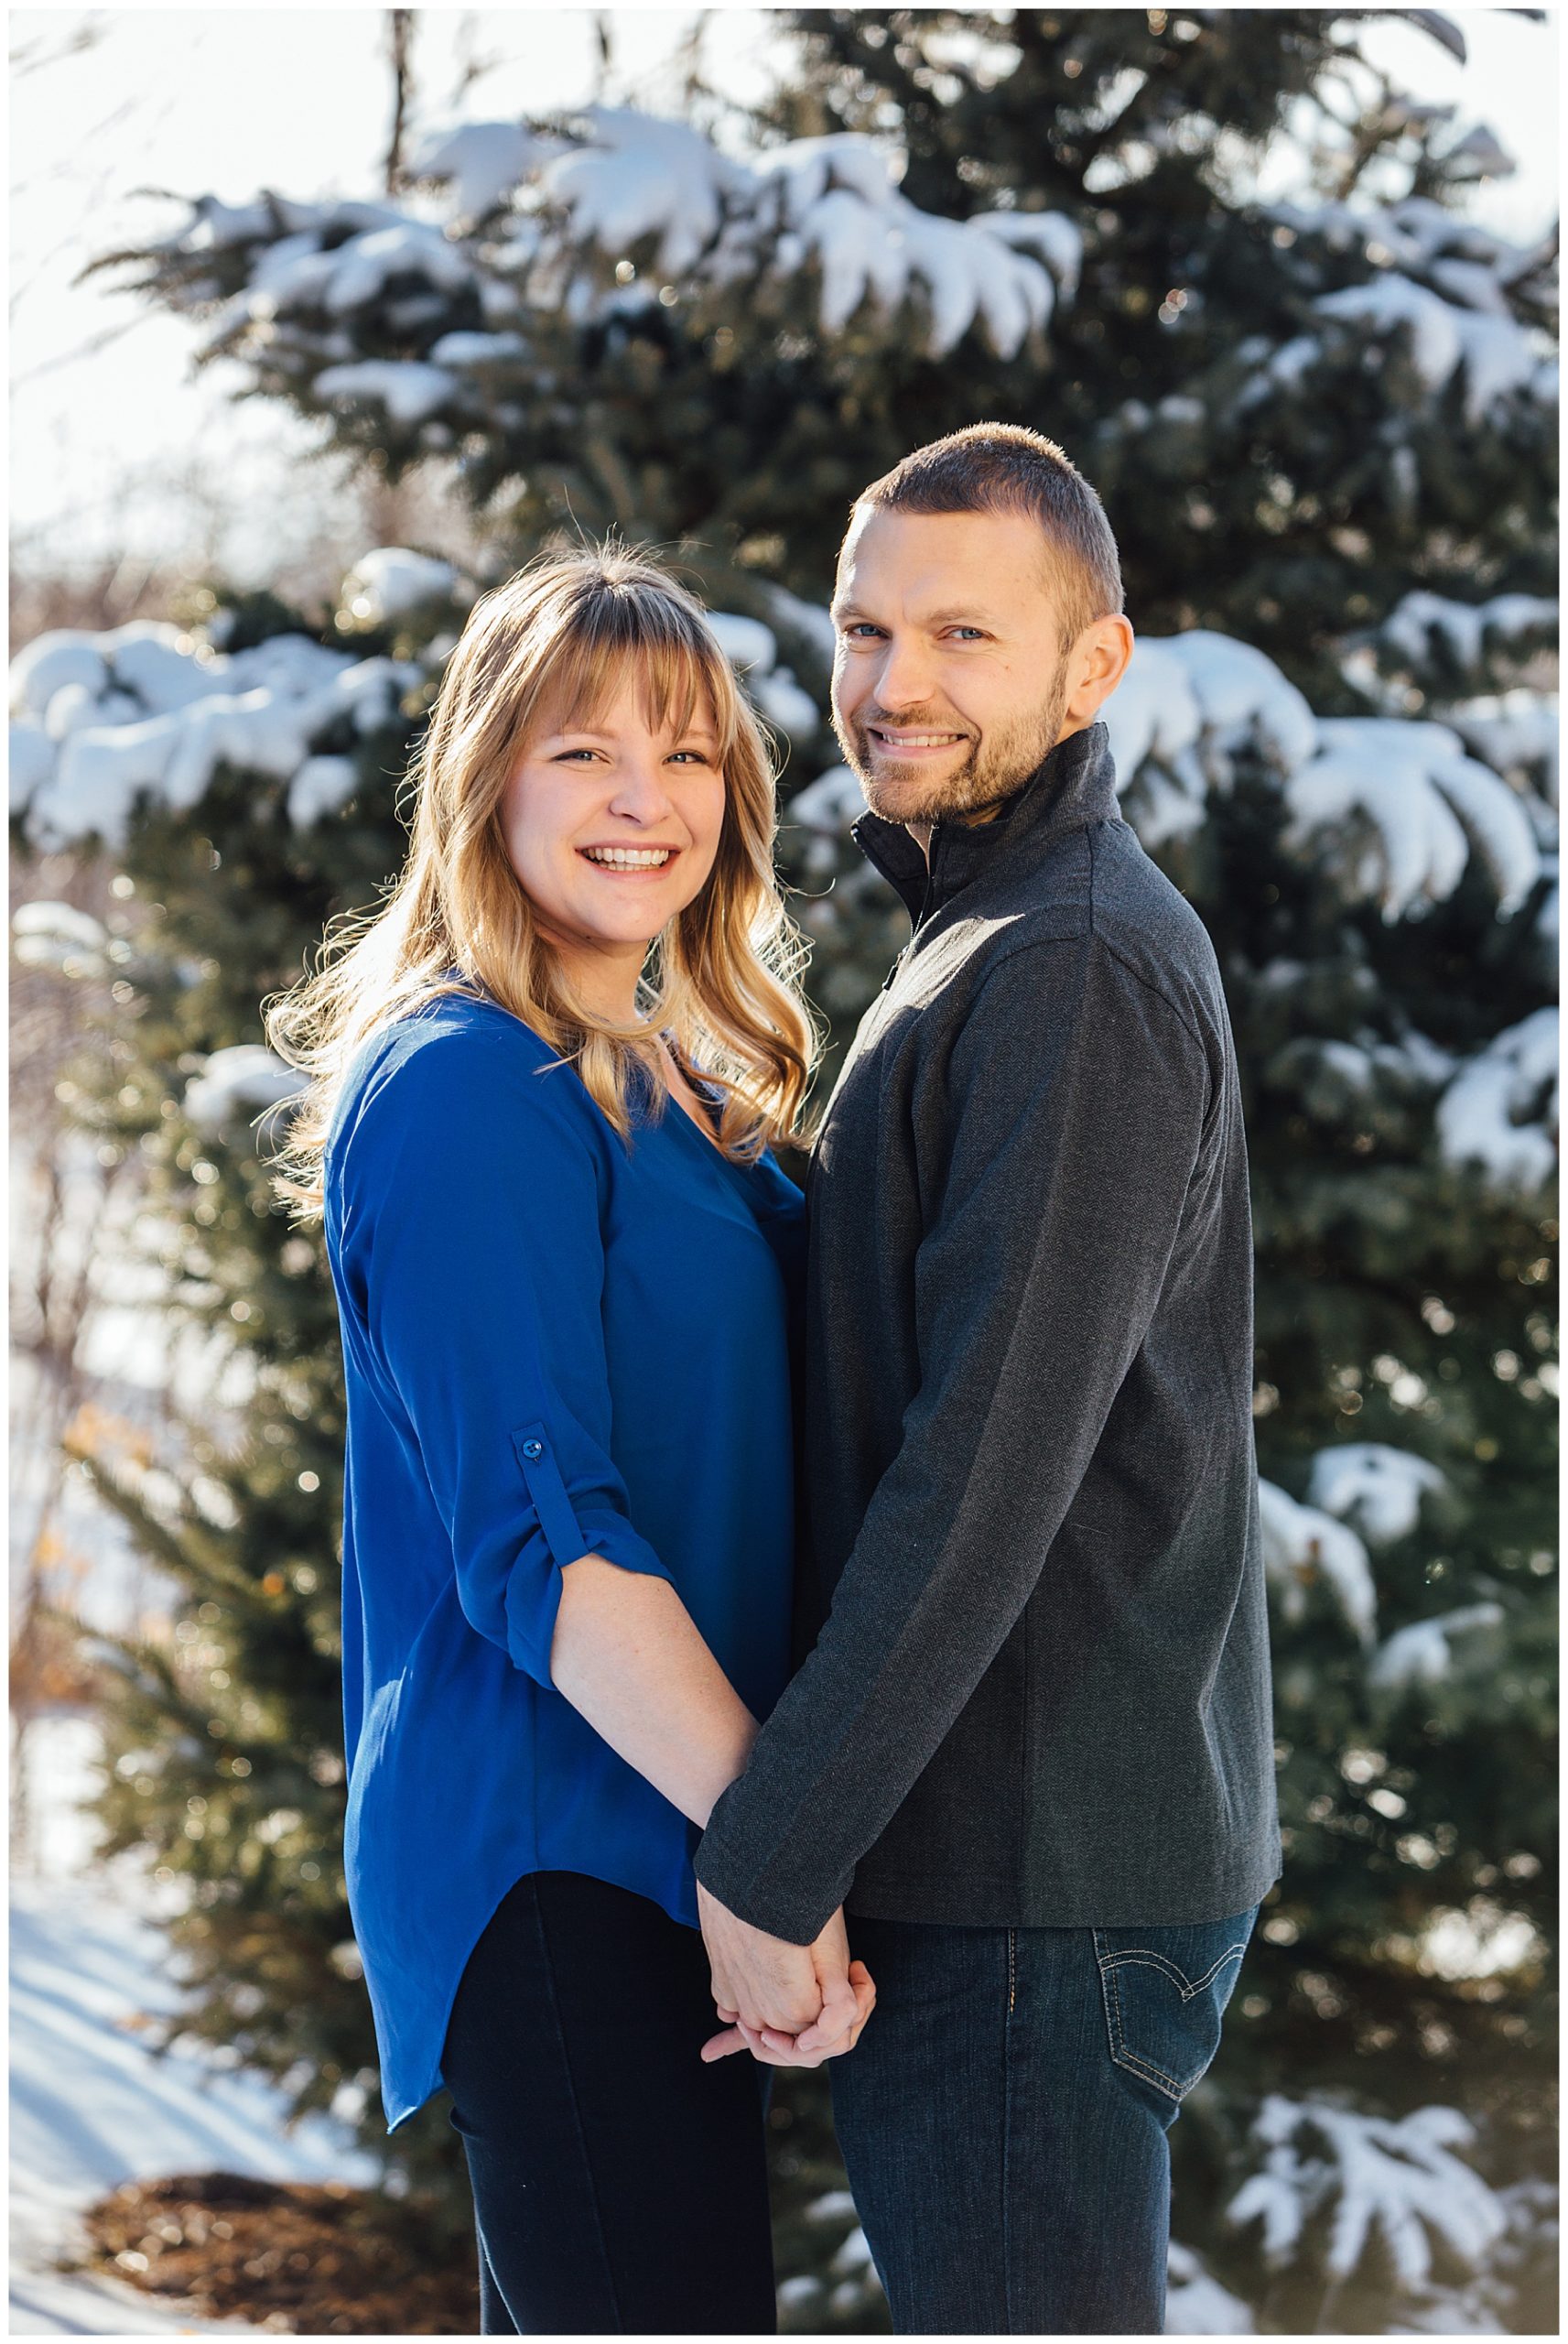 Engagement photos with snow on tree